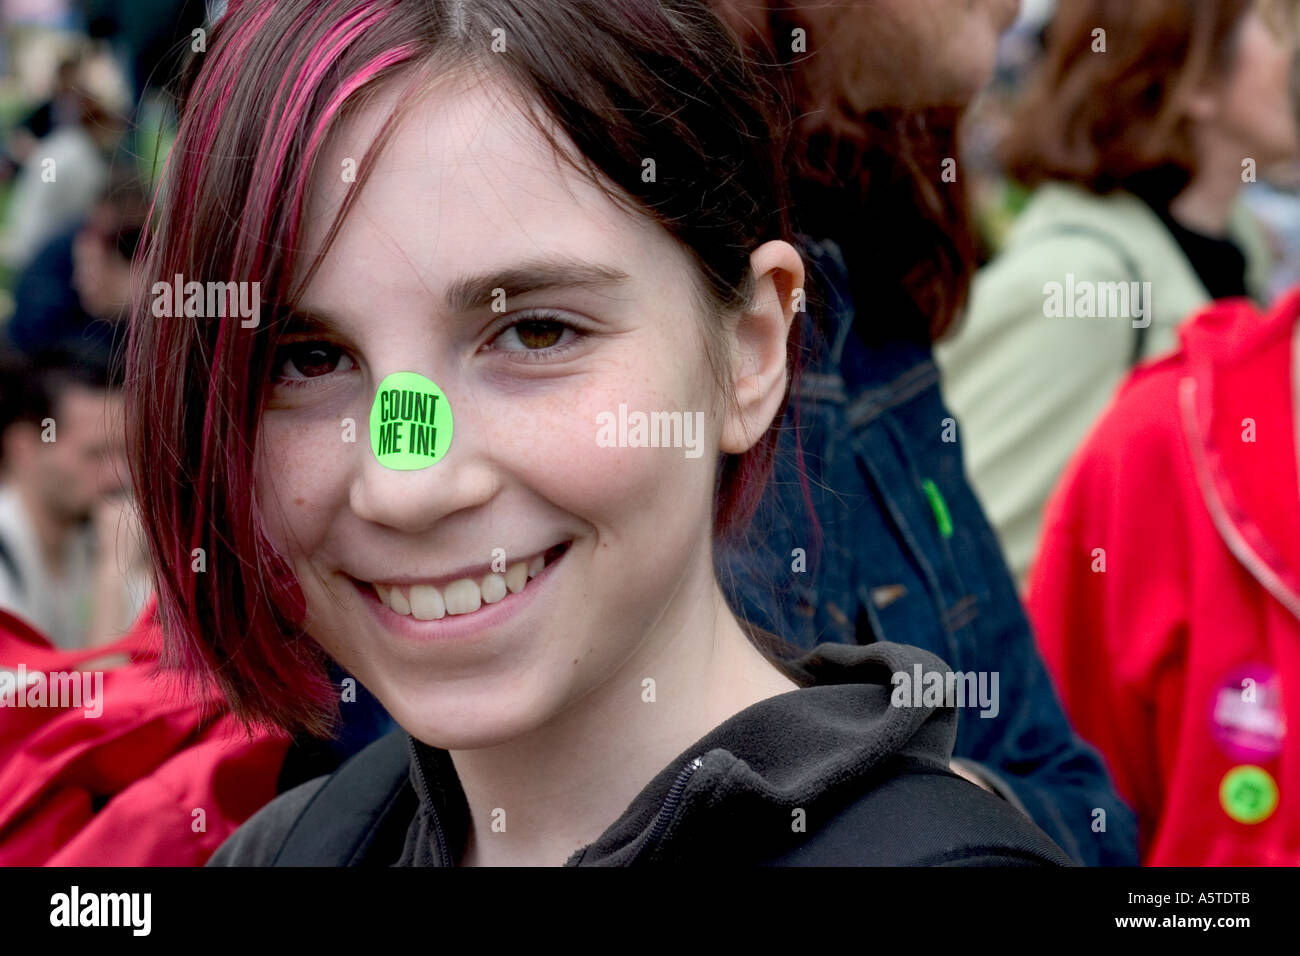 The cute young woman wears a 'count me in' sticker on her nose as she partcipates in the pro-choice march in Washington, DC. Stock Photo